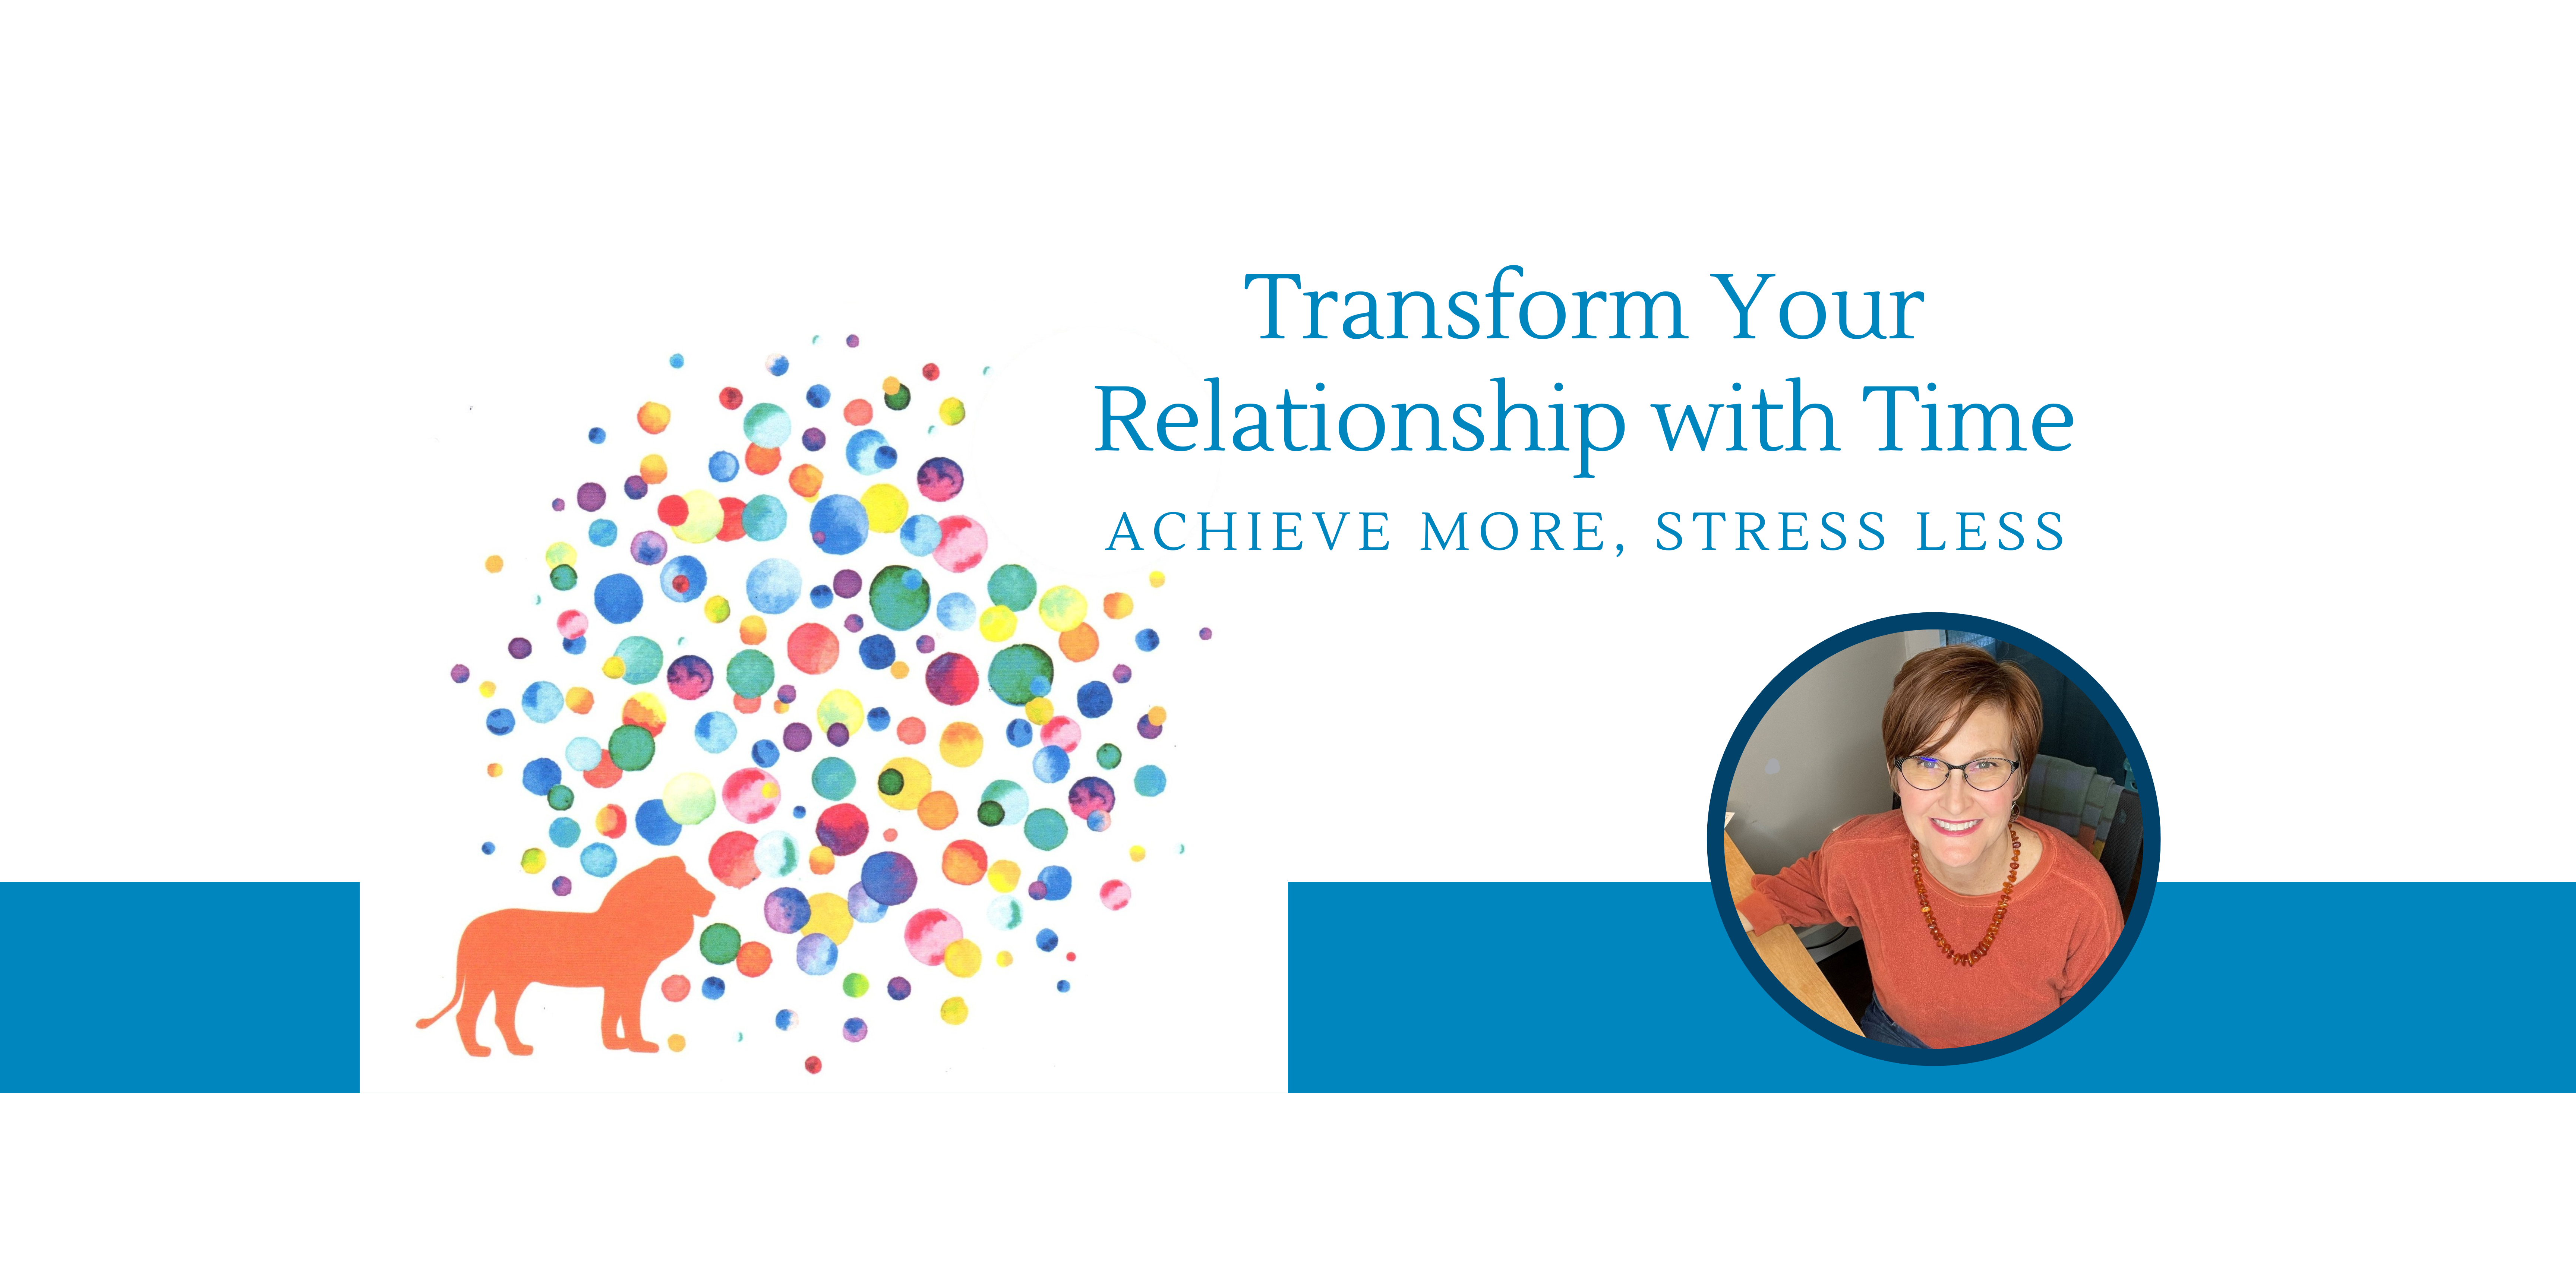 Transform Your Relationship with Time: Achieve More, Stress Less